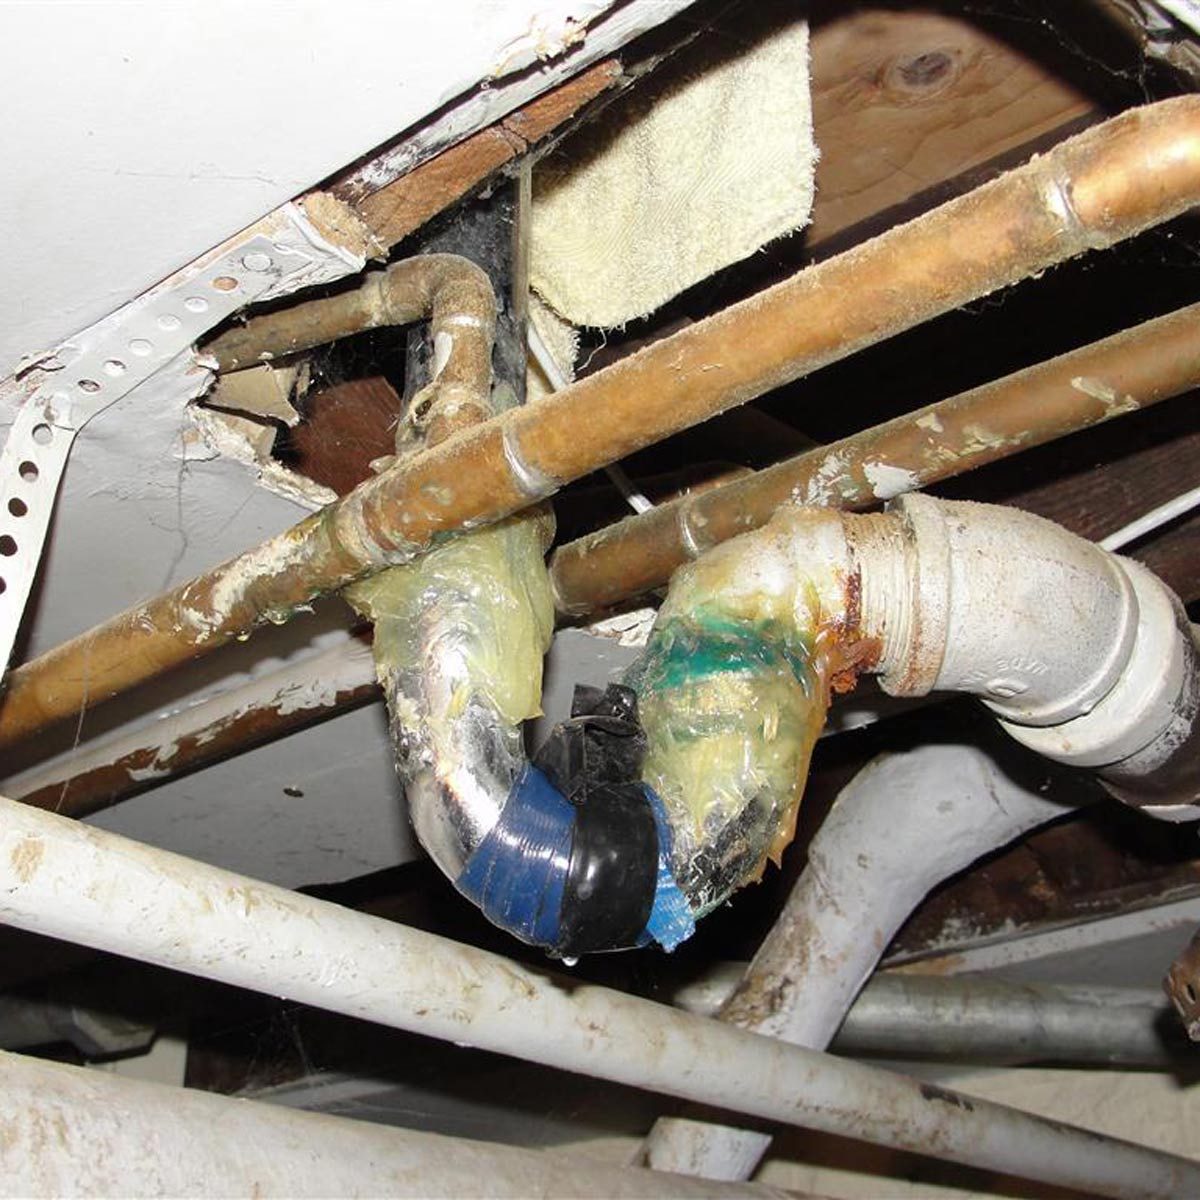 100 Plumbing Fails And Other Scary Stuff Family Handyman